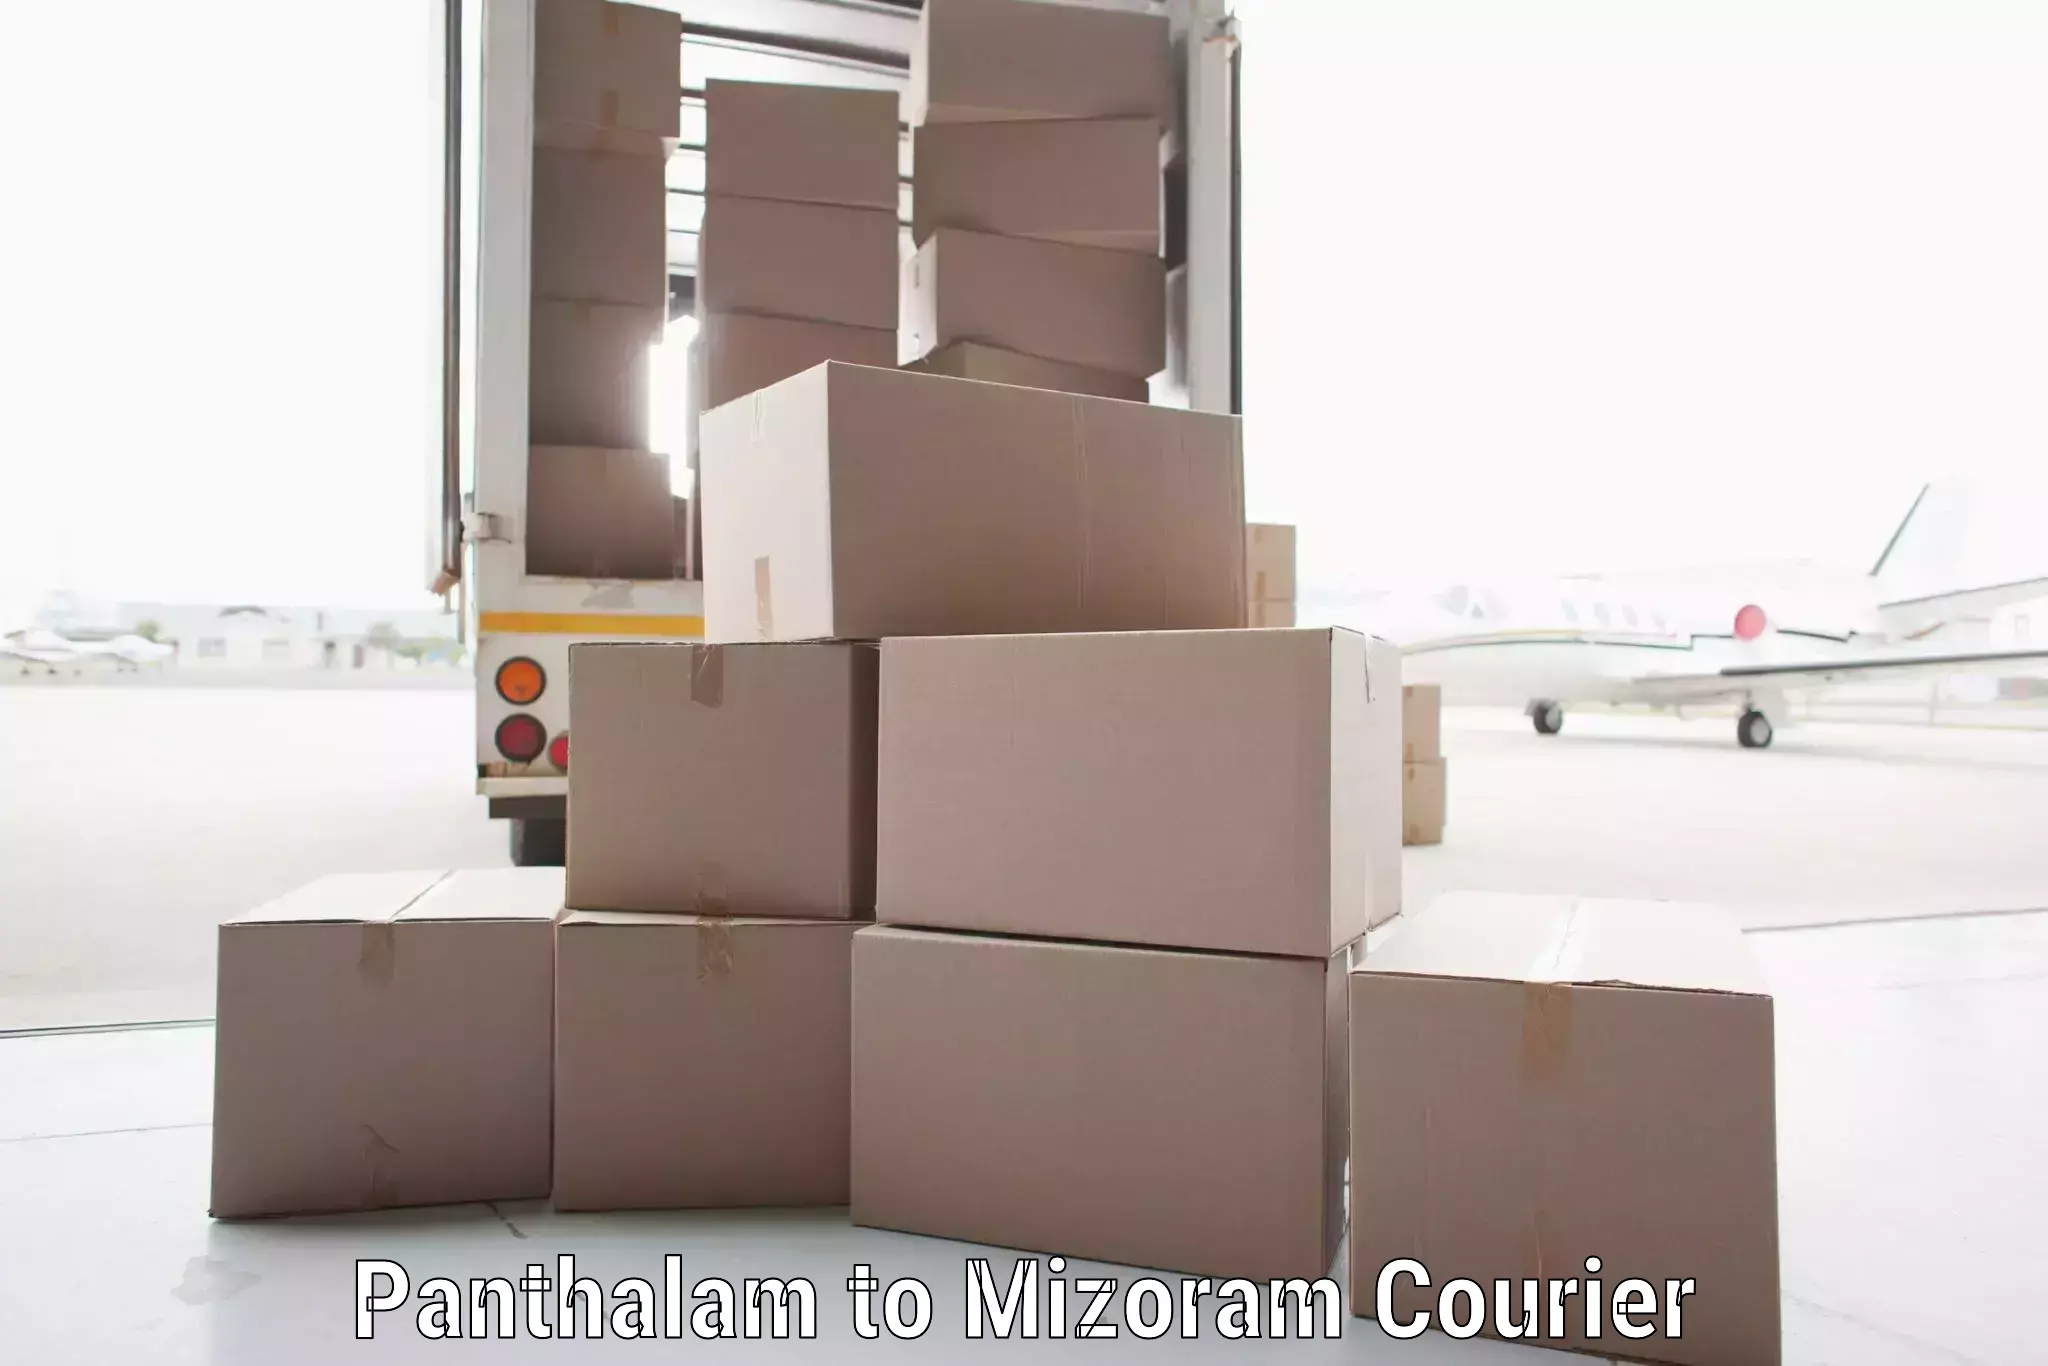 Courier service innovation Panthalam to Siaha